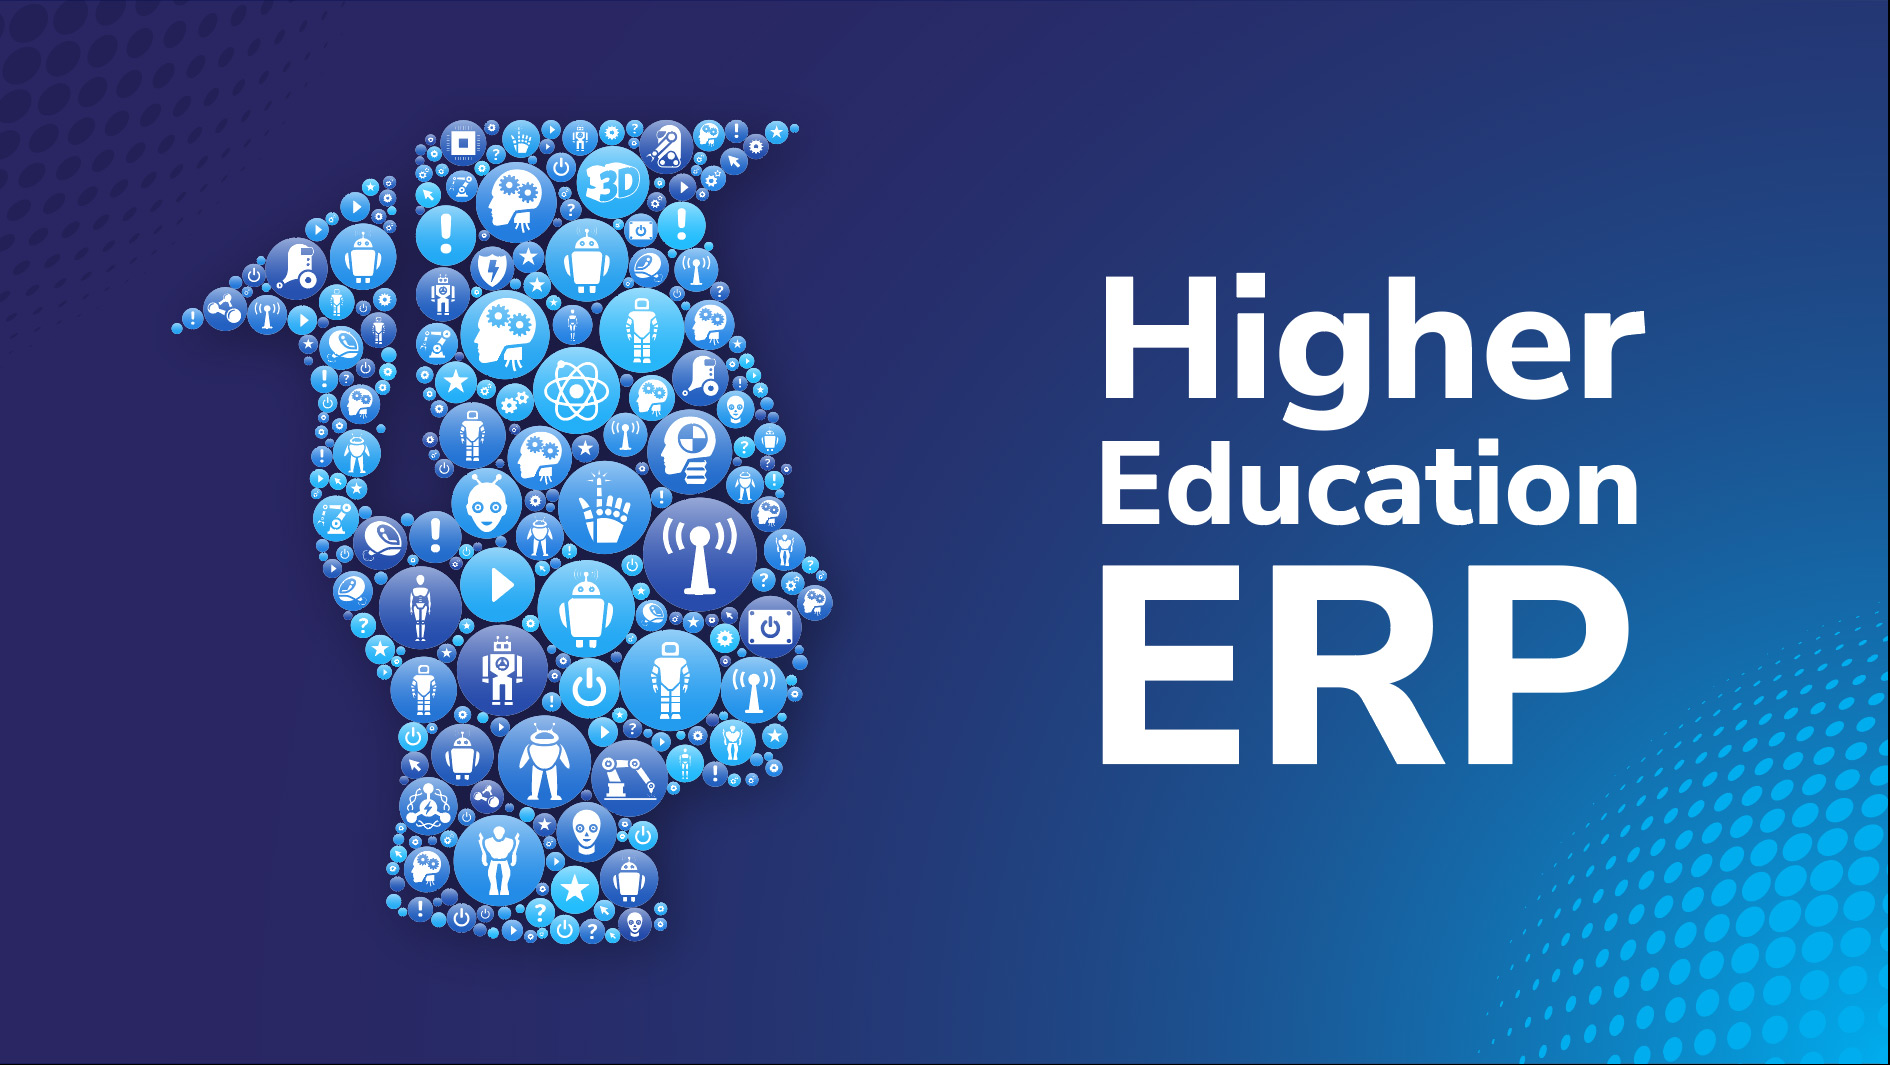 Higher Education ERP: Why Do higher education institutions Need Automation and ERP?